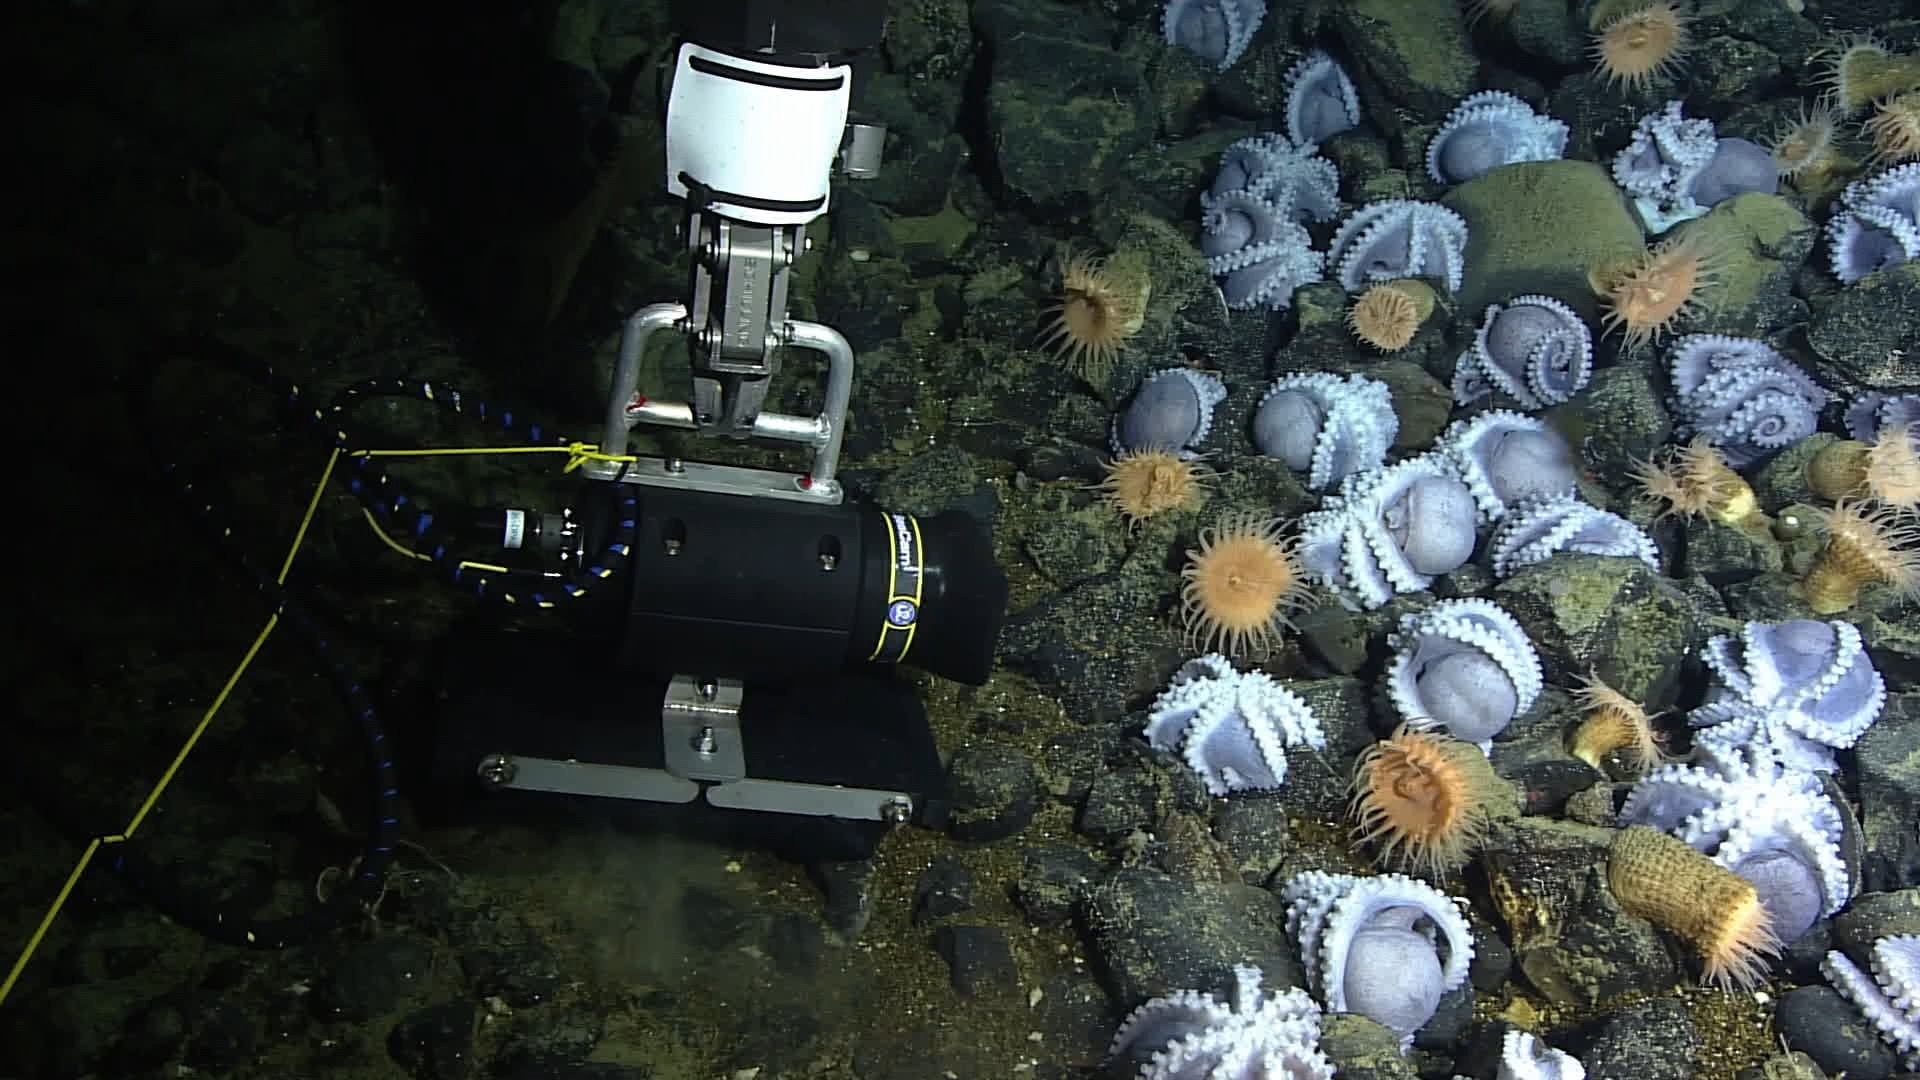 The MBARI camera allows for close ups of these incredible creatures.